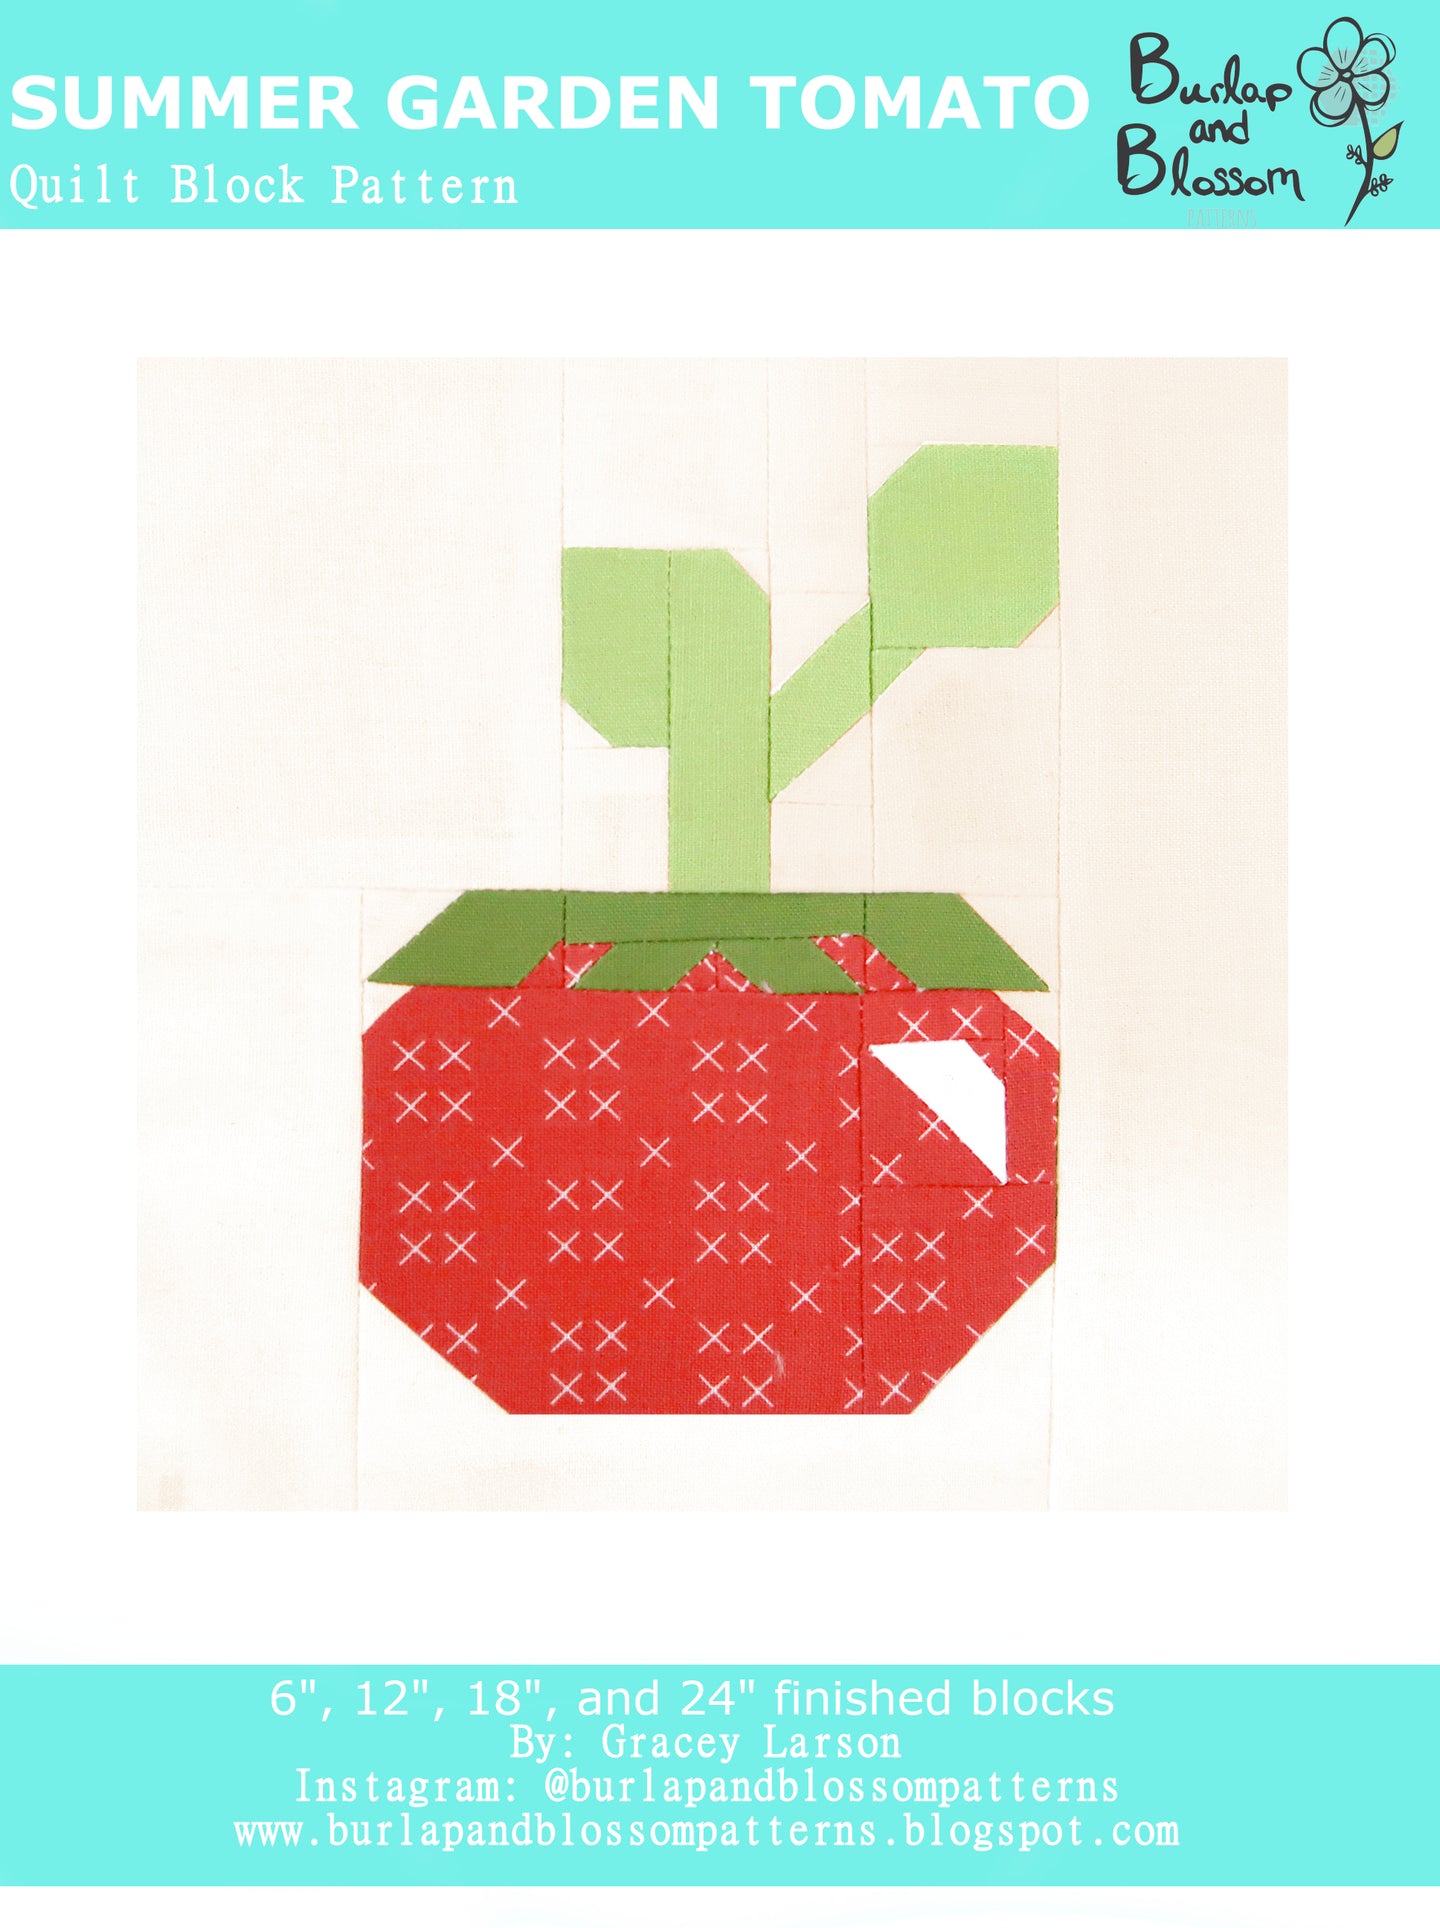 Pattern, Summer Garden Tomato Quilt Block by Burlap and Blossom (digital download)